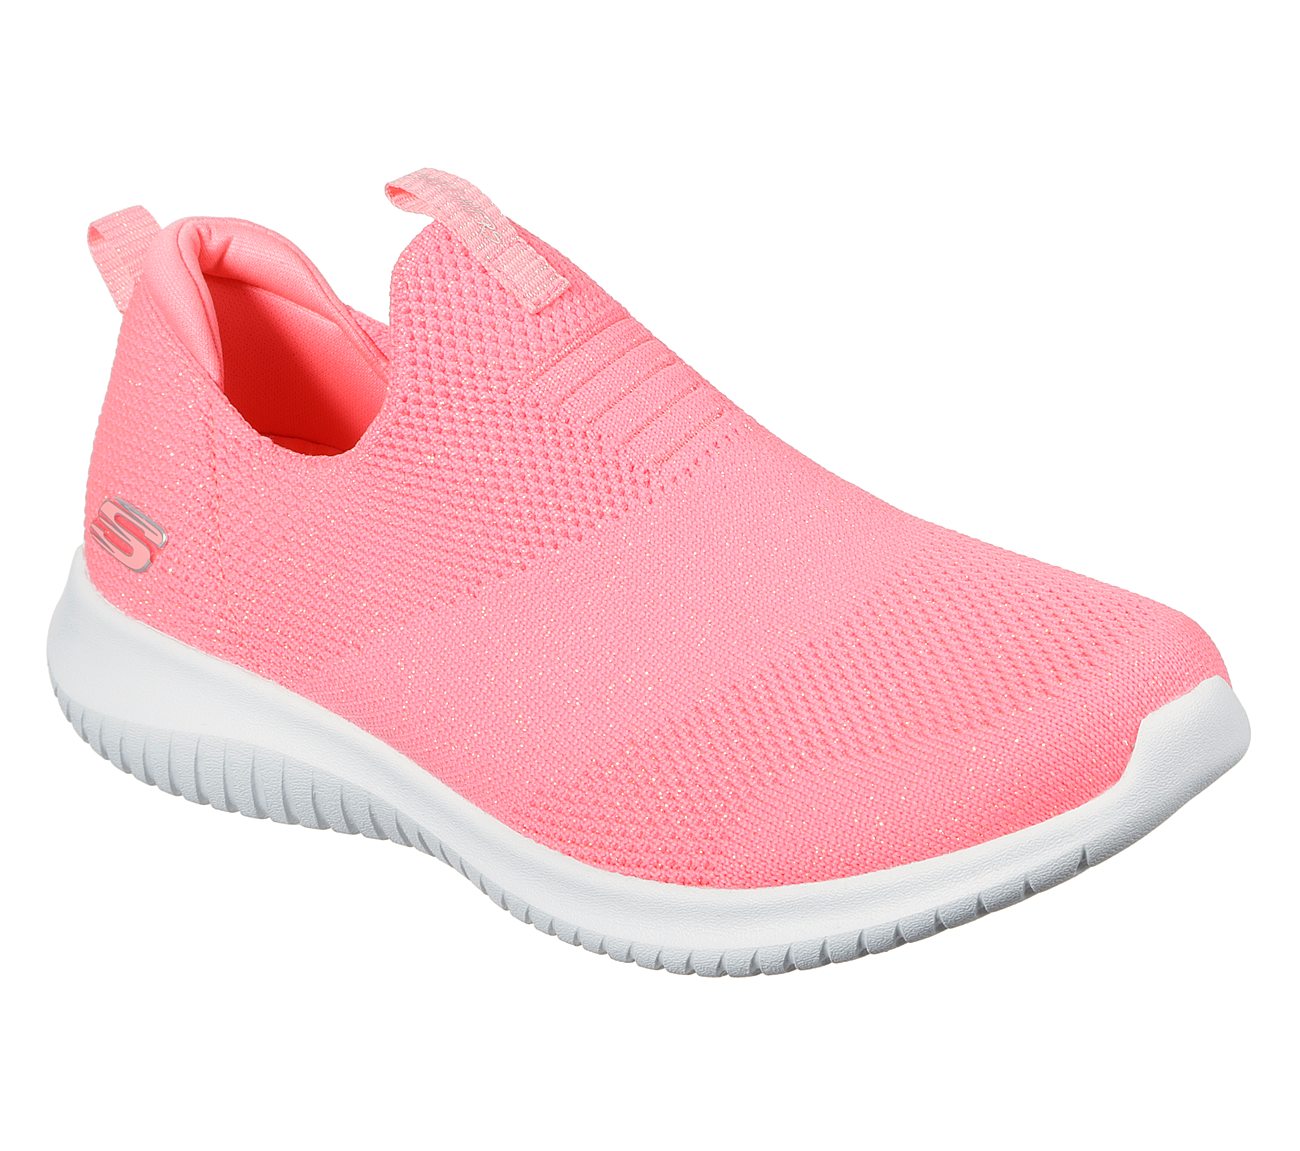 ULTRA FLEX - CANDY CRAVINGS, CCORAL Footwear Right View